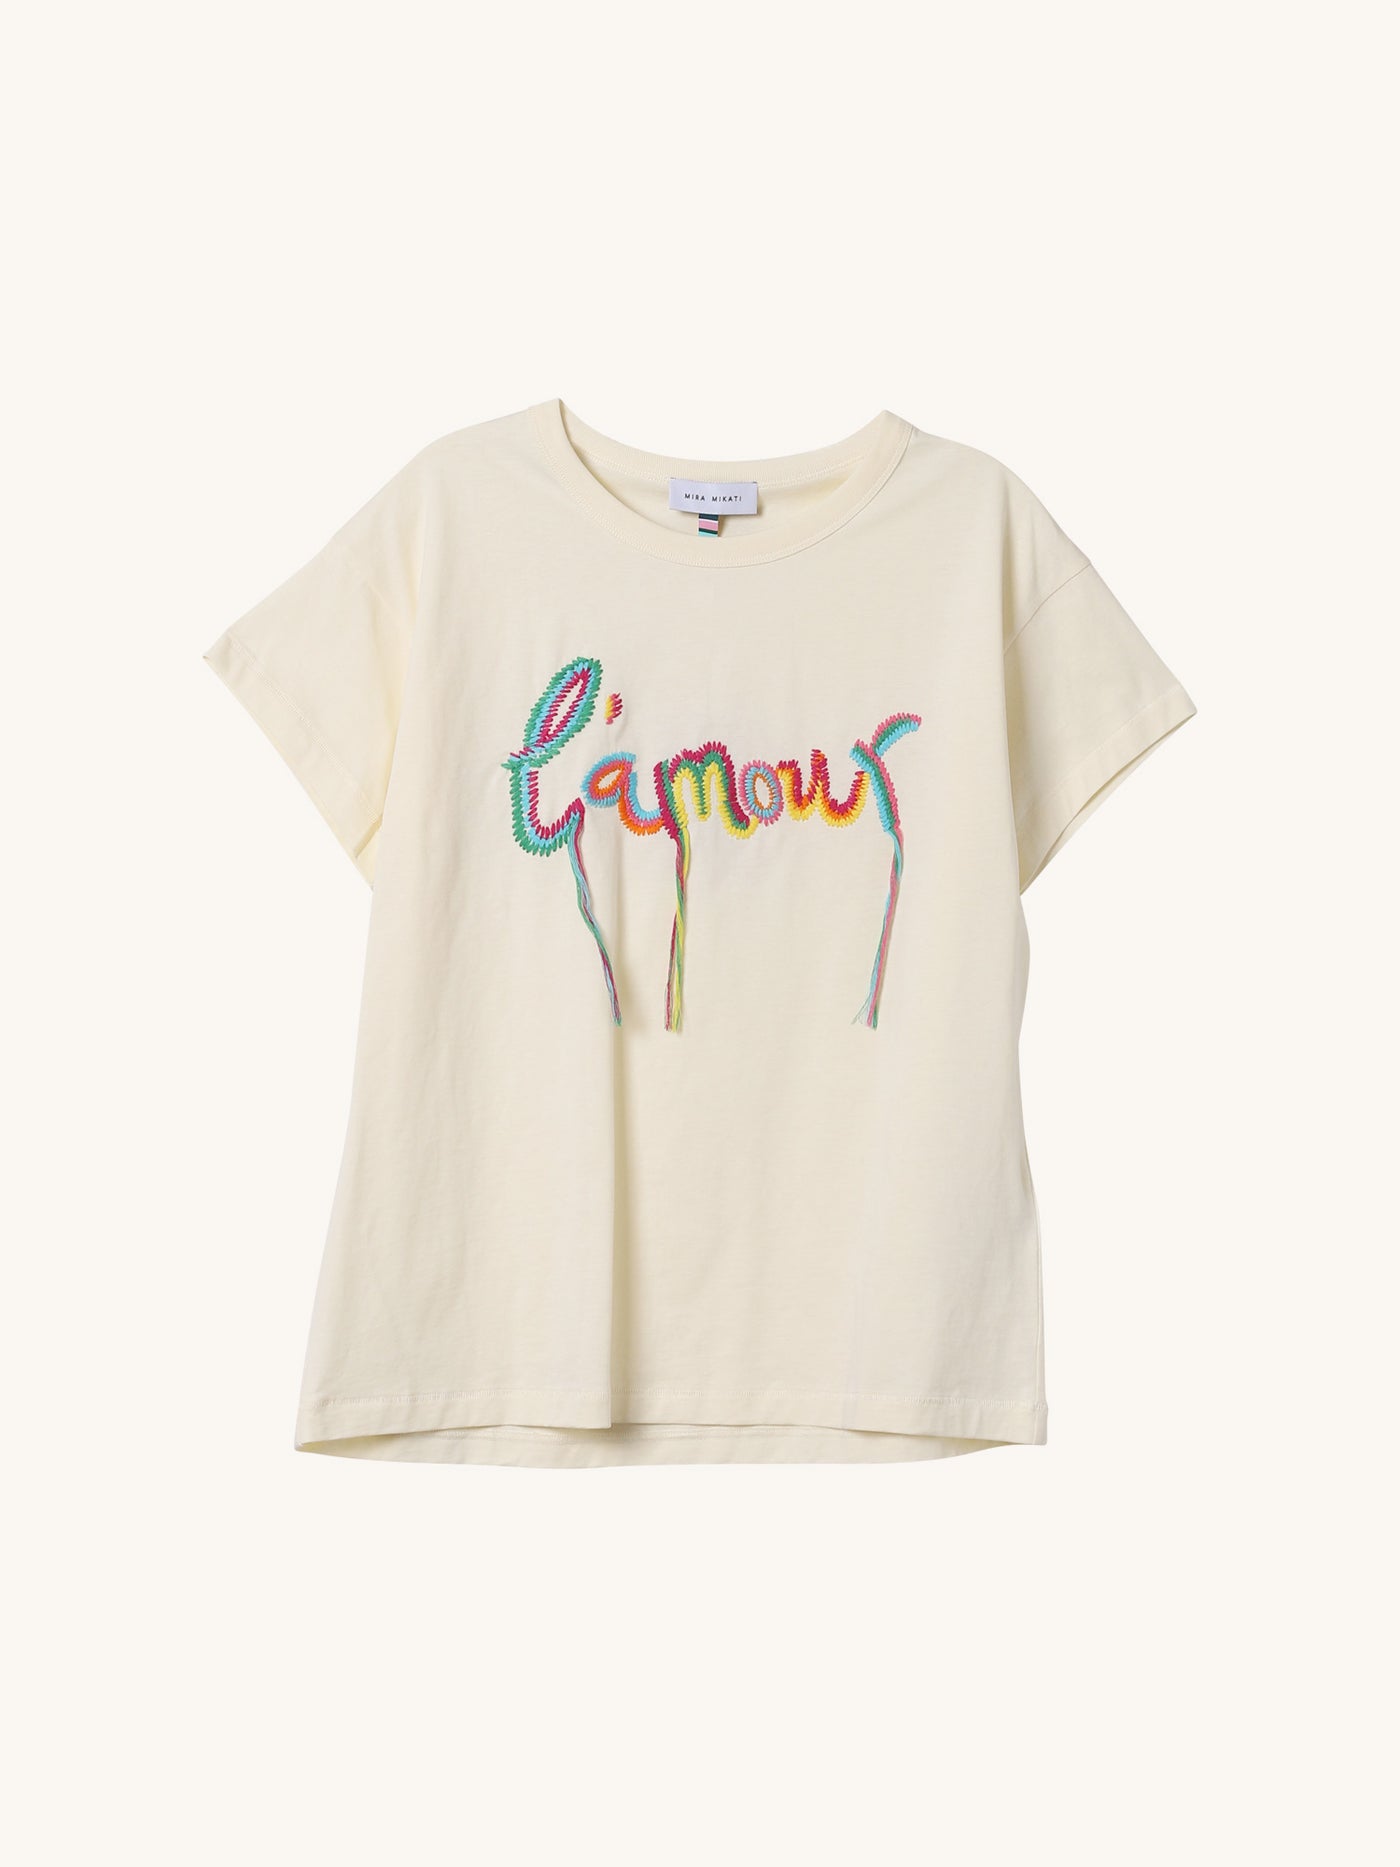 L'Amour Embroidered T-Shirt